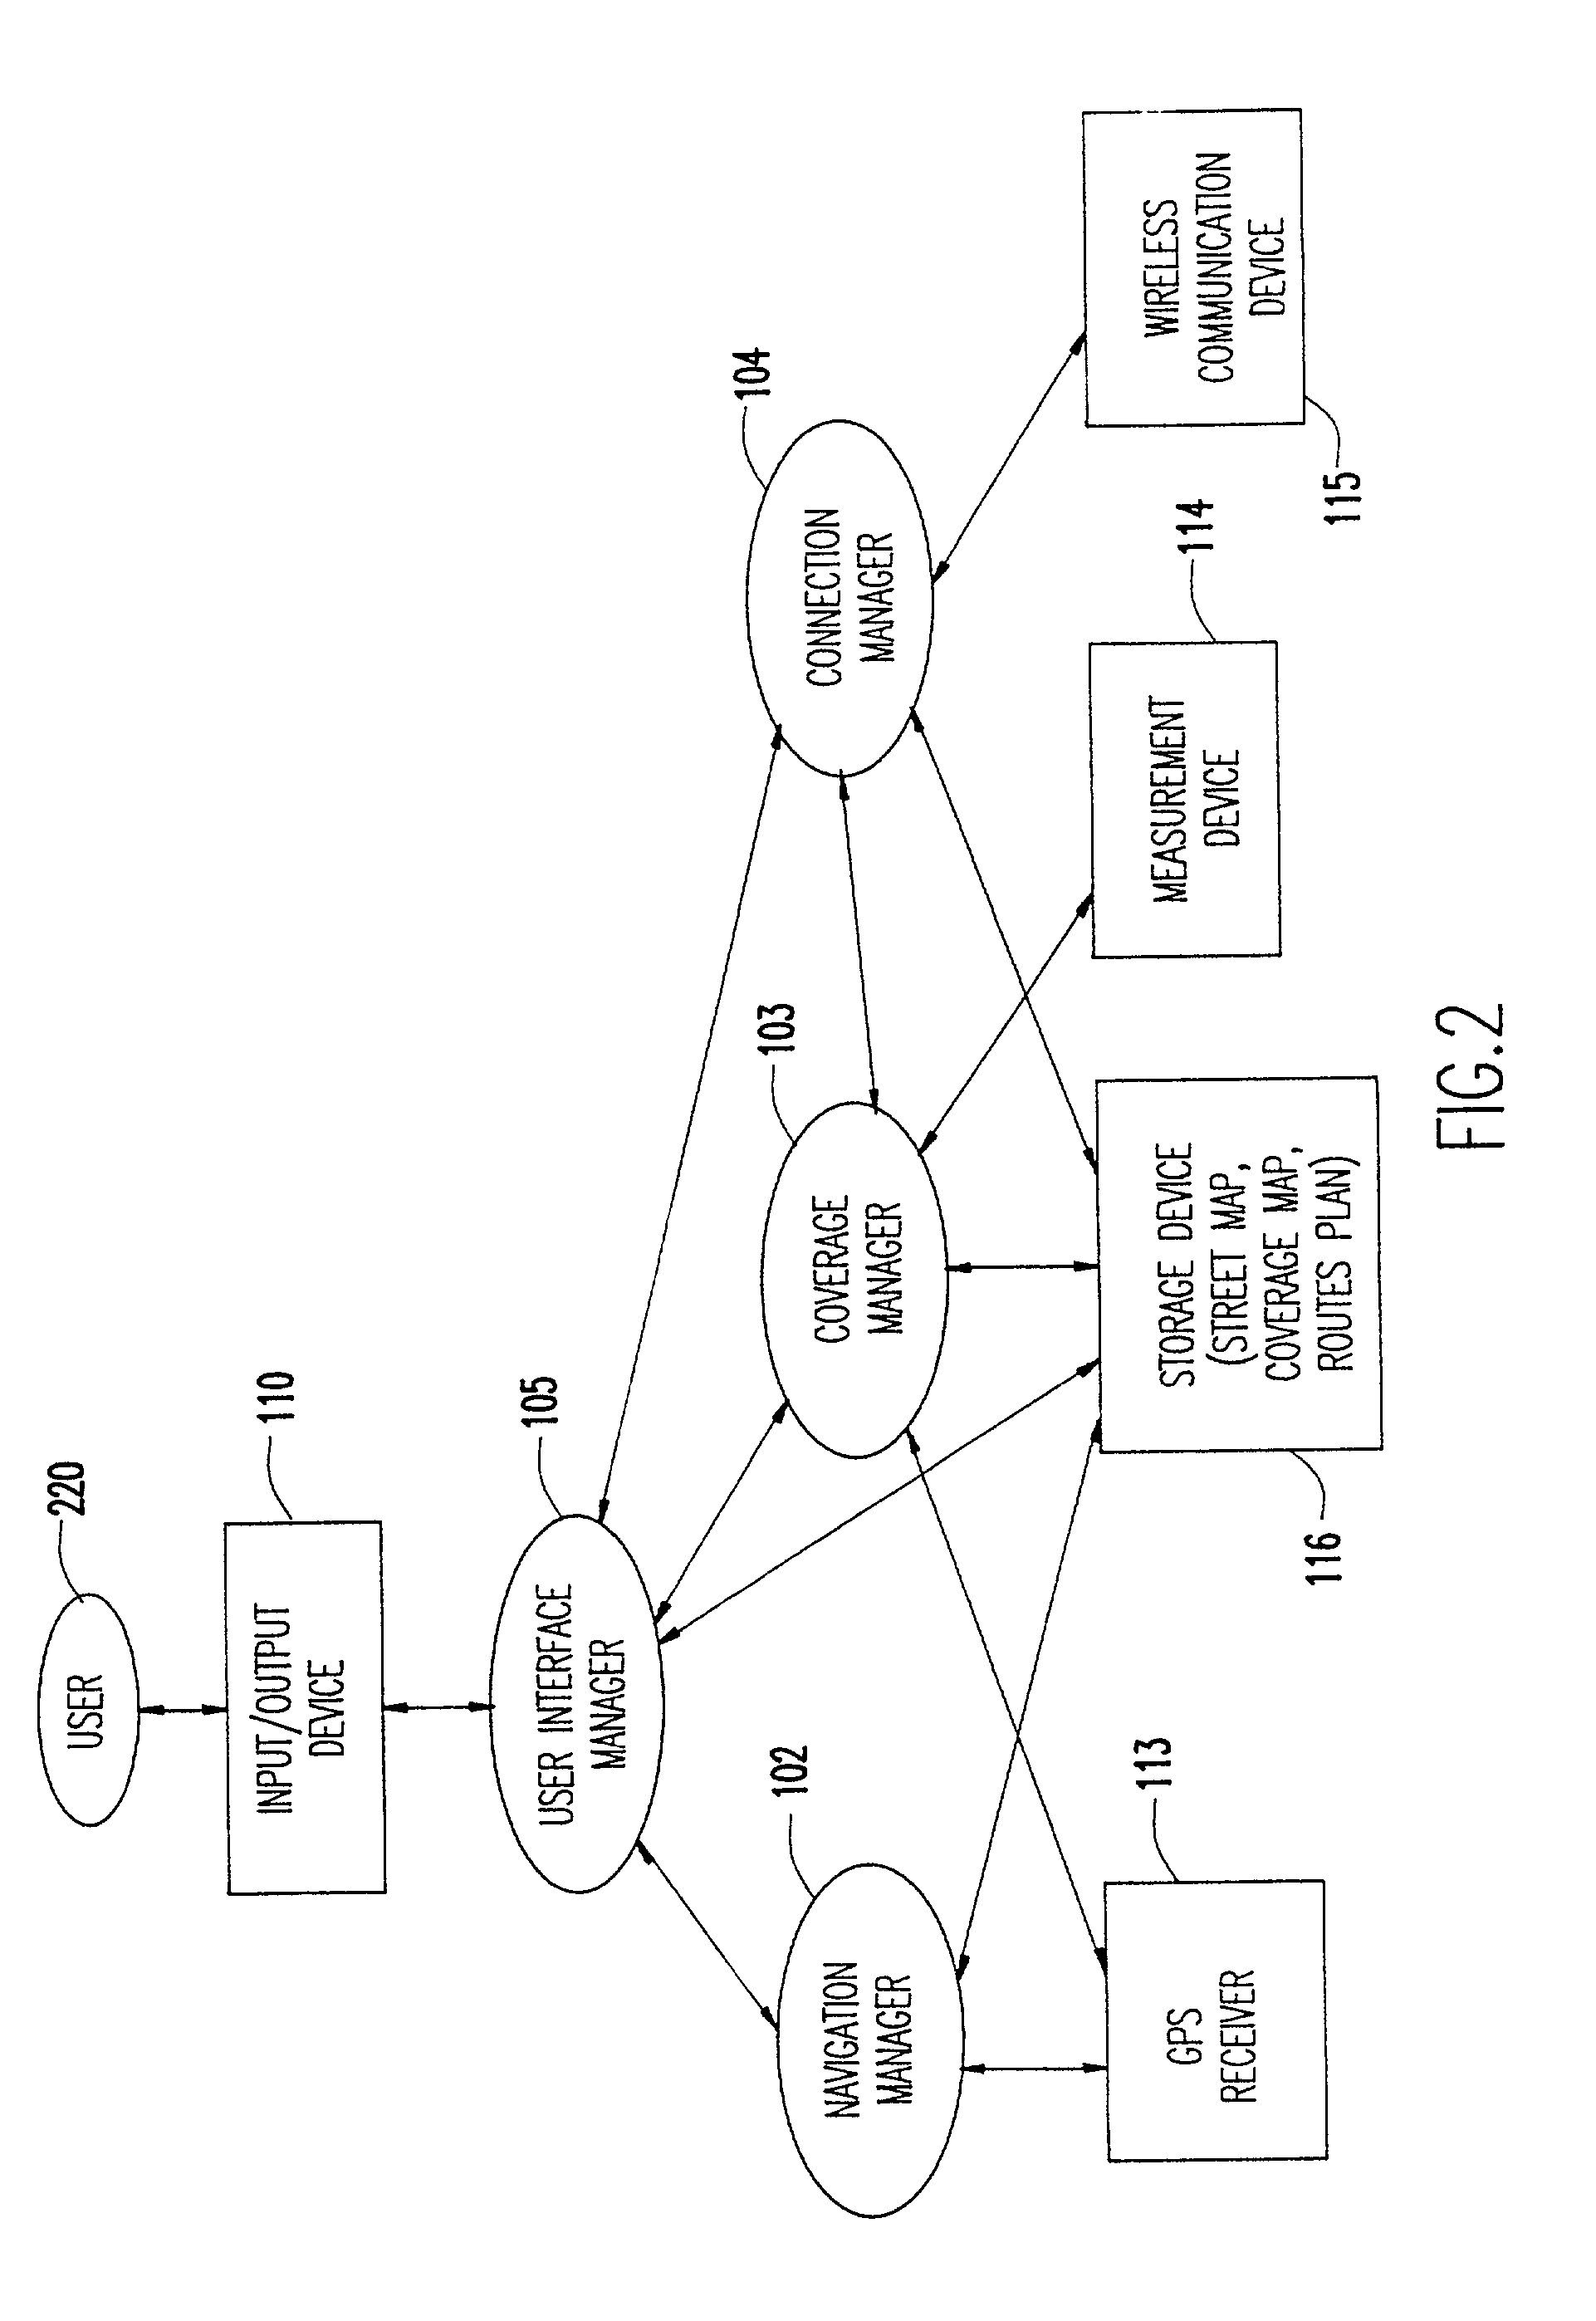 Dual map system for navigation and wireless communication